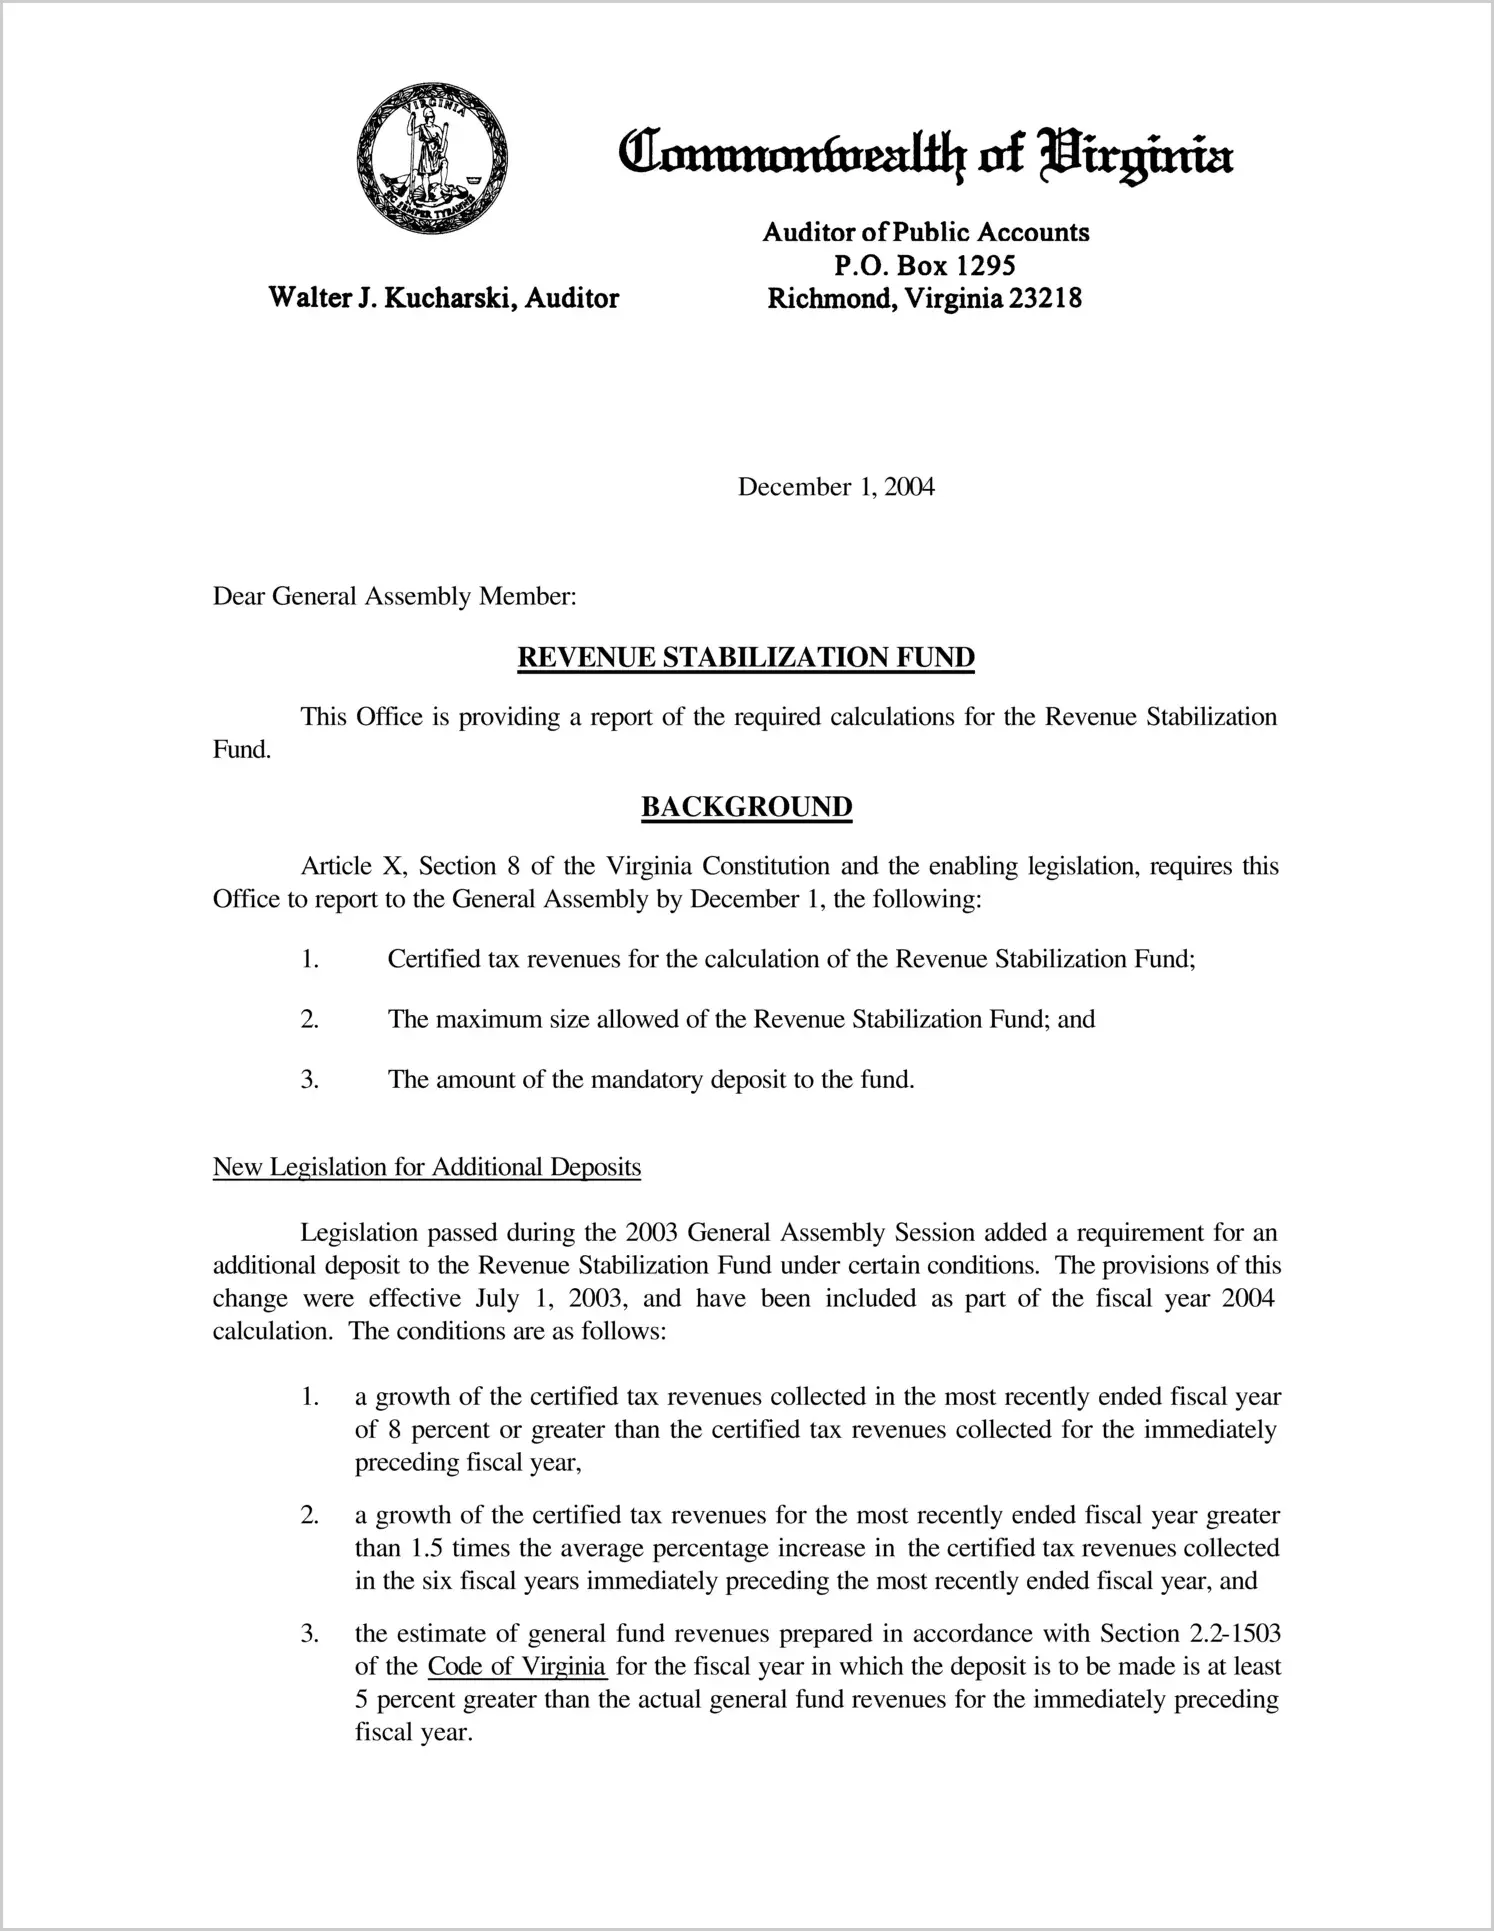 Special ReportReport of the Required Calculations for the Revenue Stabilization Fund 2004(Report Date: 12/01/2004)  Hard copy of report is available upon request.